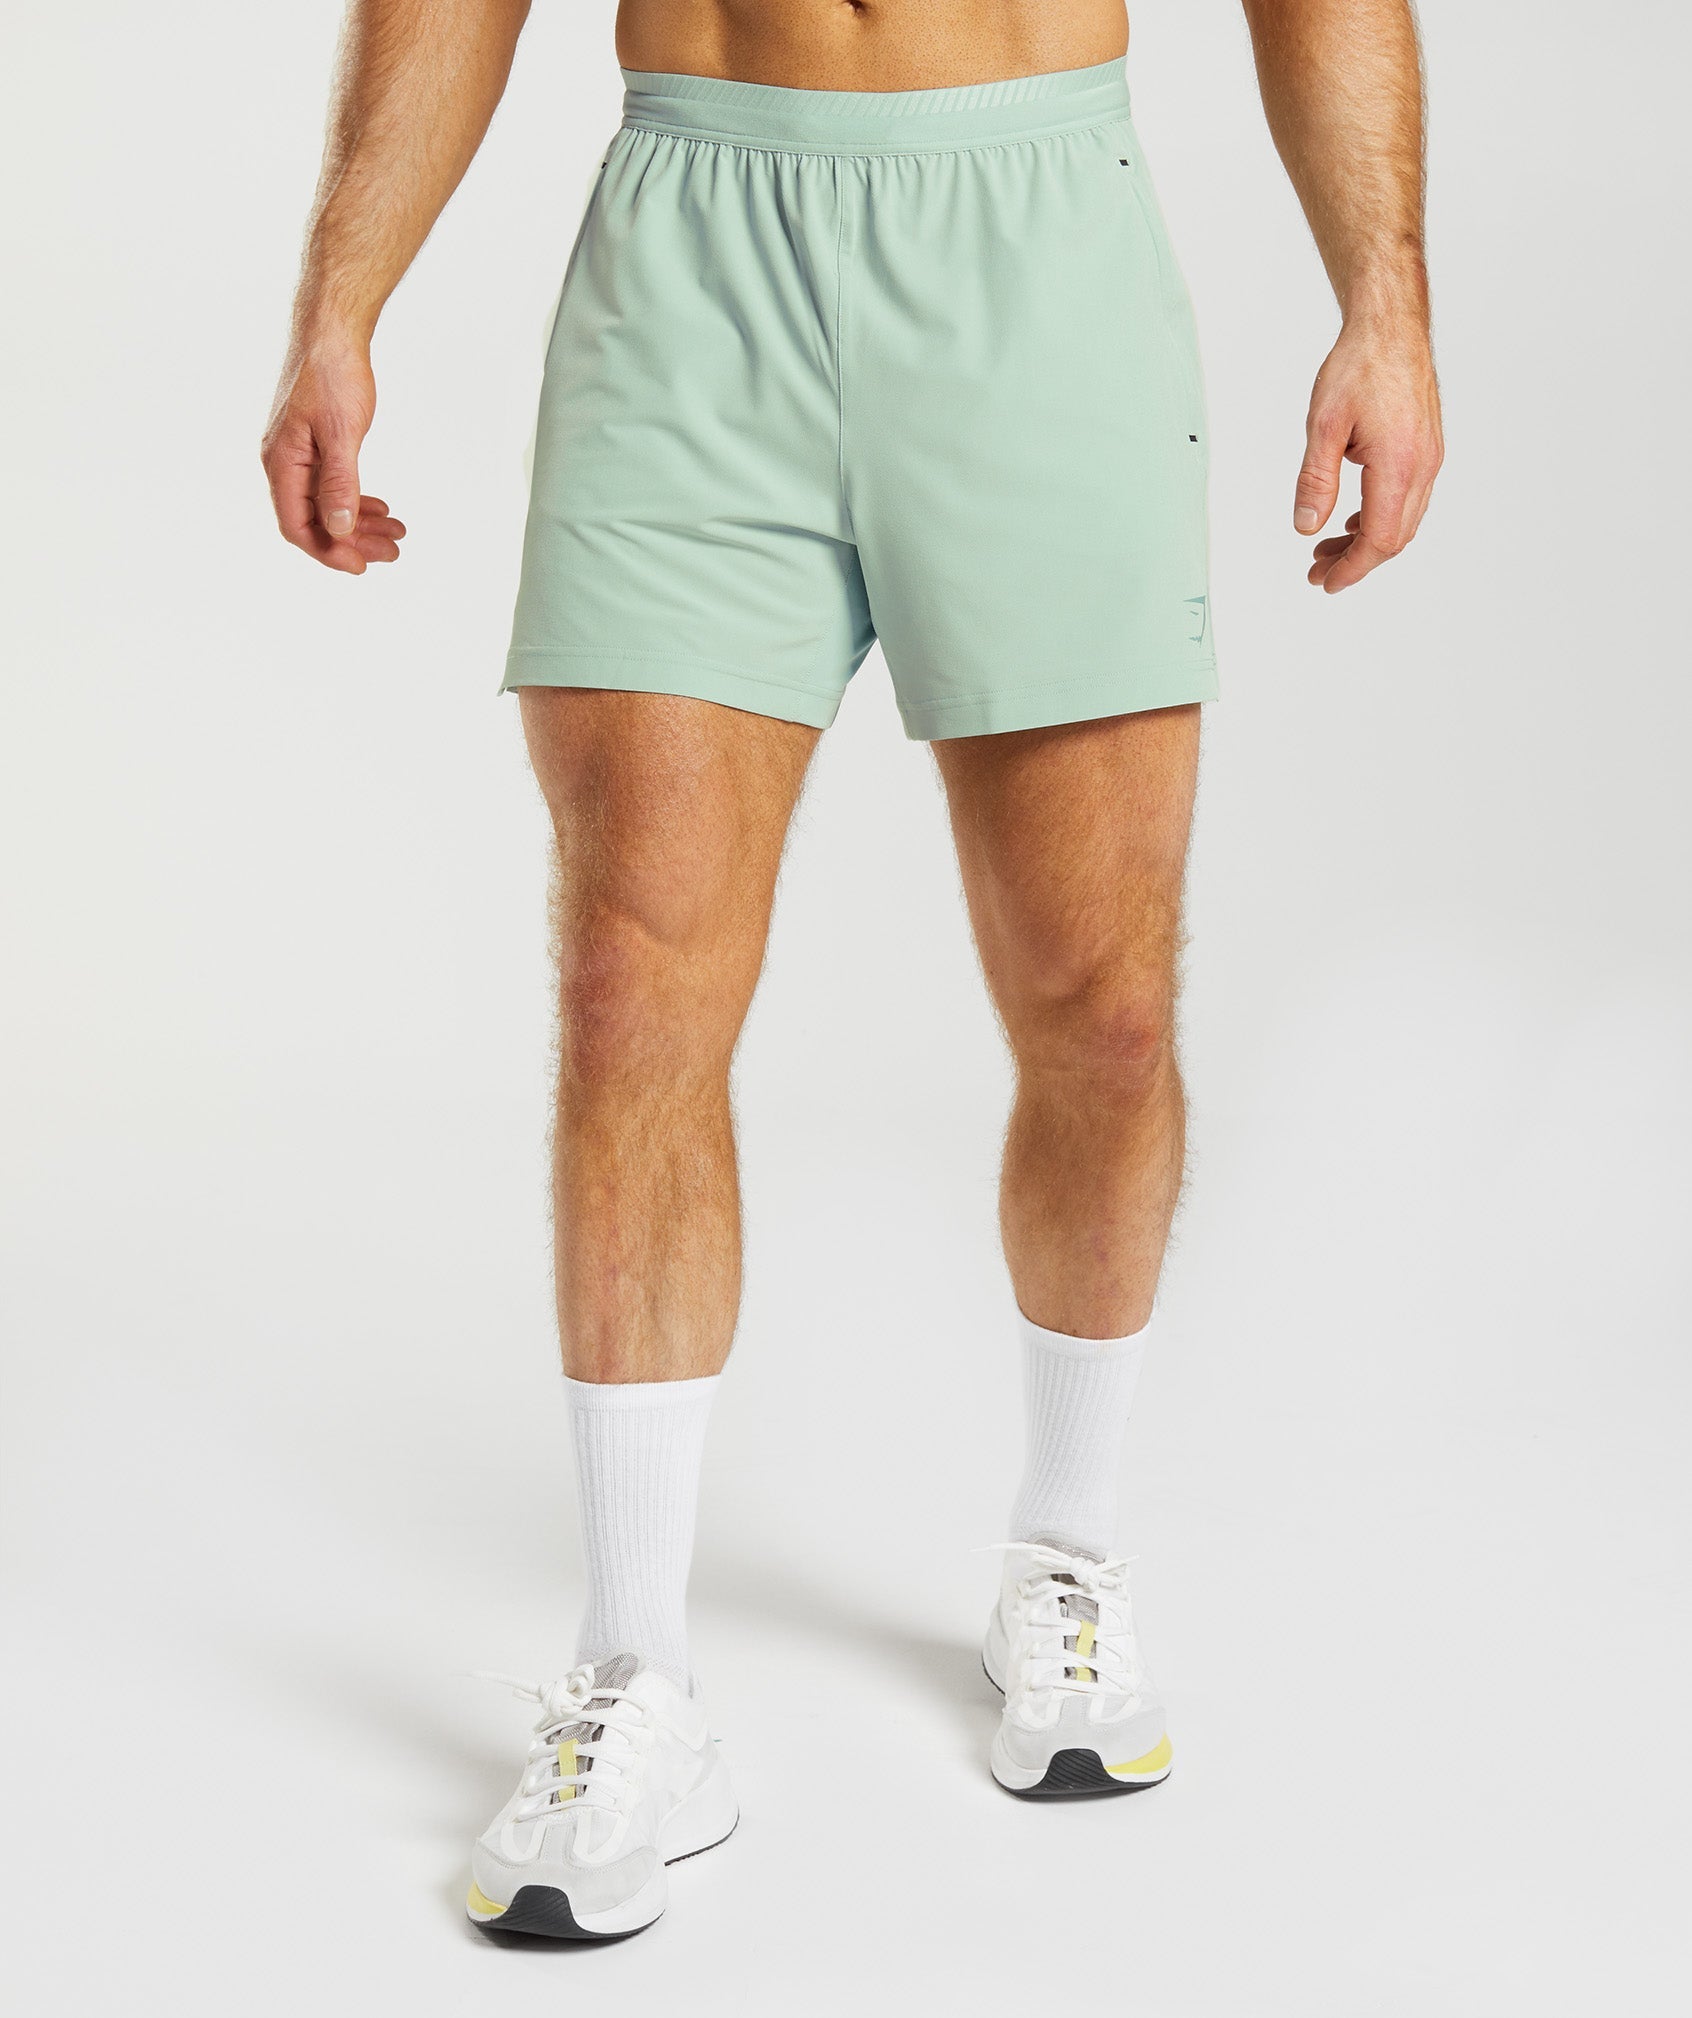 Apex 5" Hybrid Shorts in Frost Teal - view 1